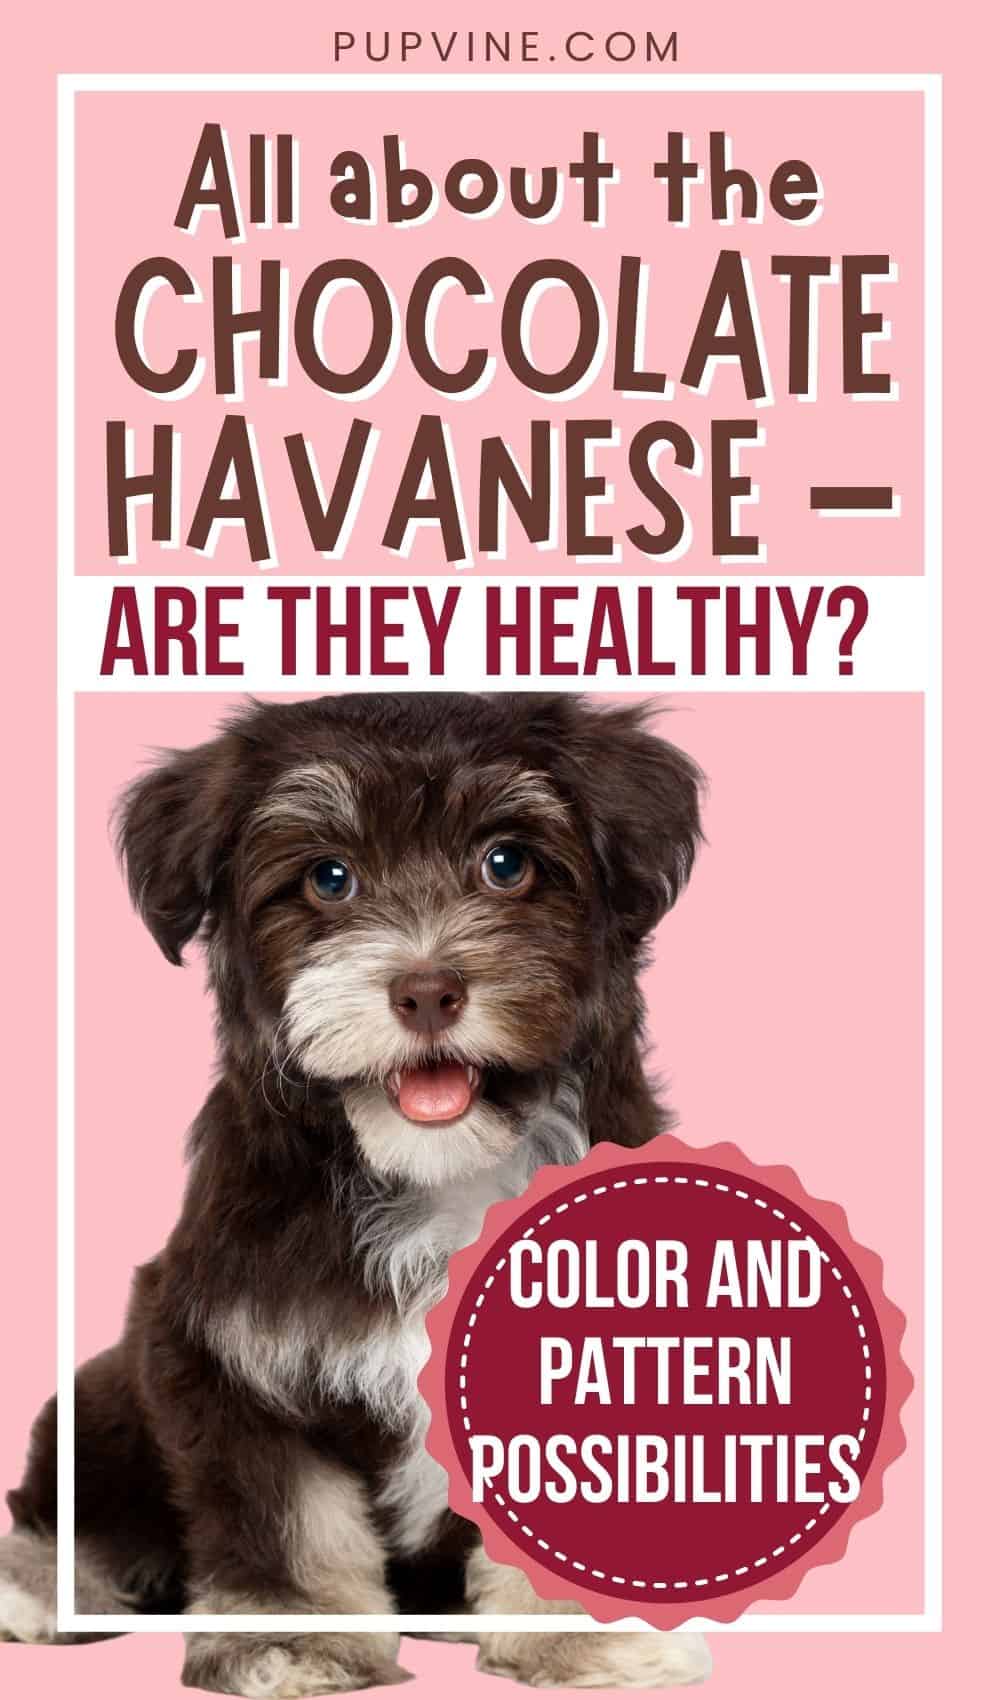 All About The Chocolate Havanese – Are They Healthy? Color And Pattern Possibilities